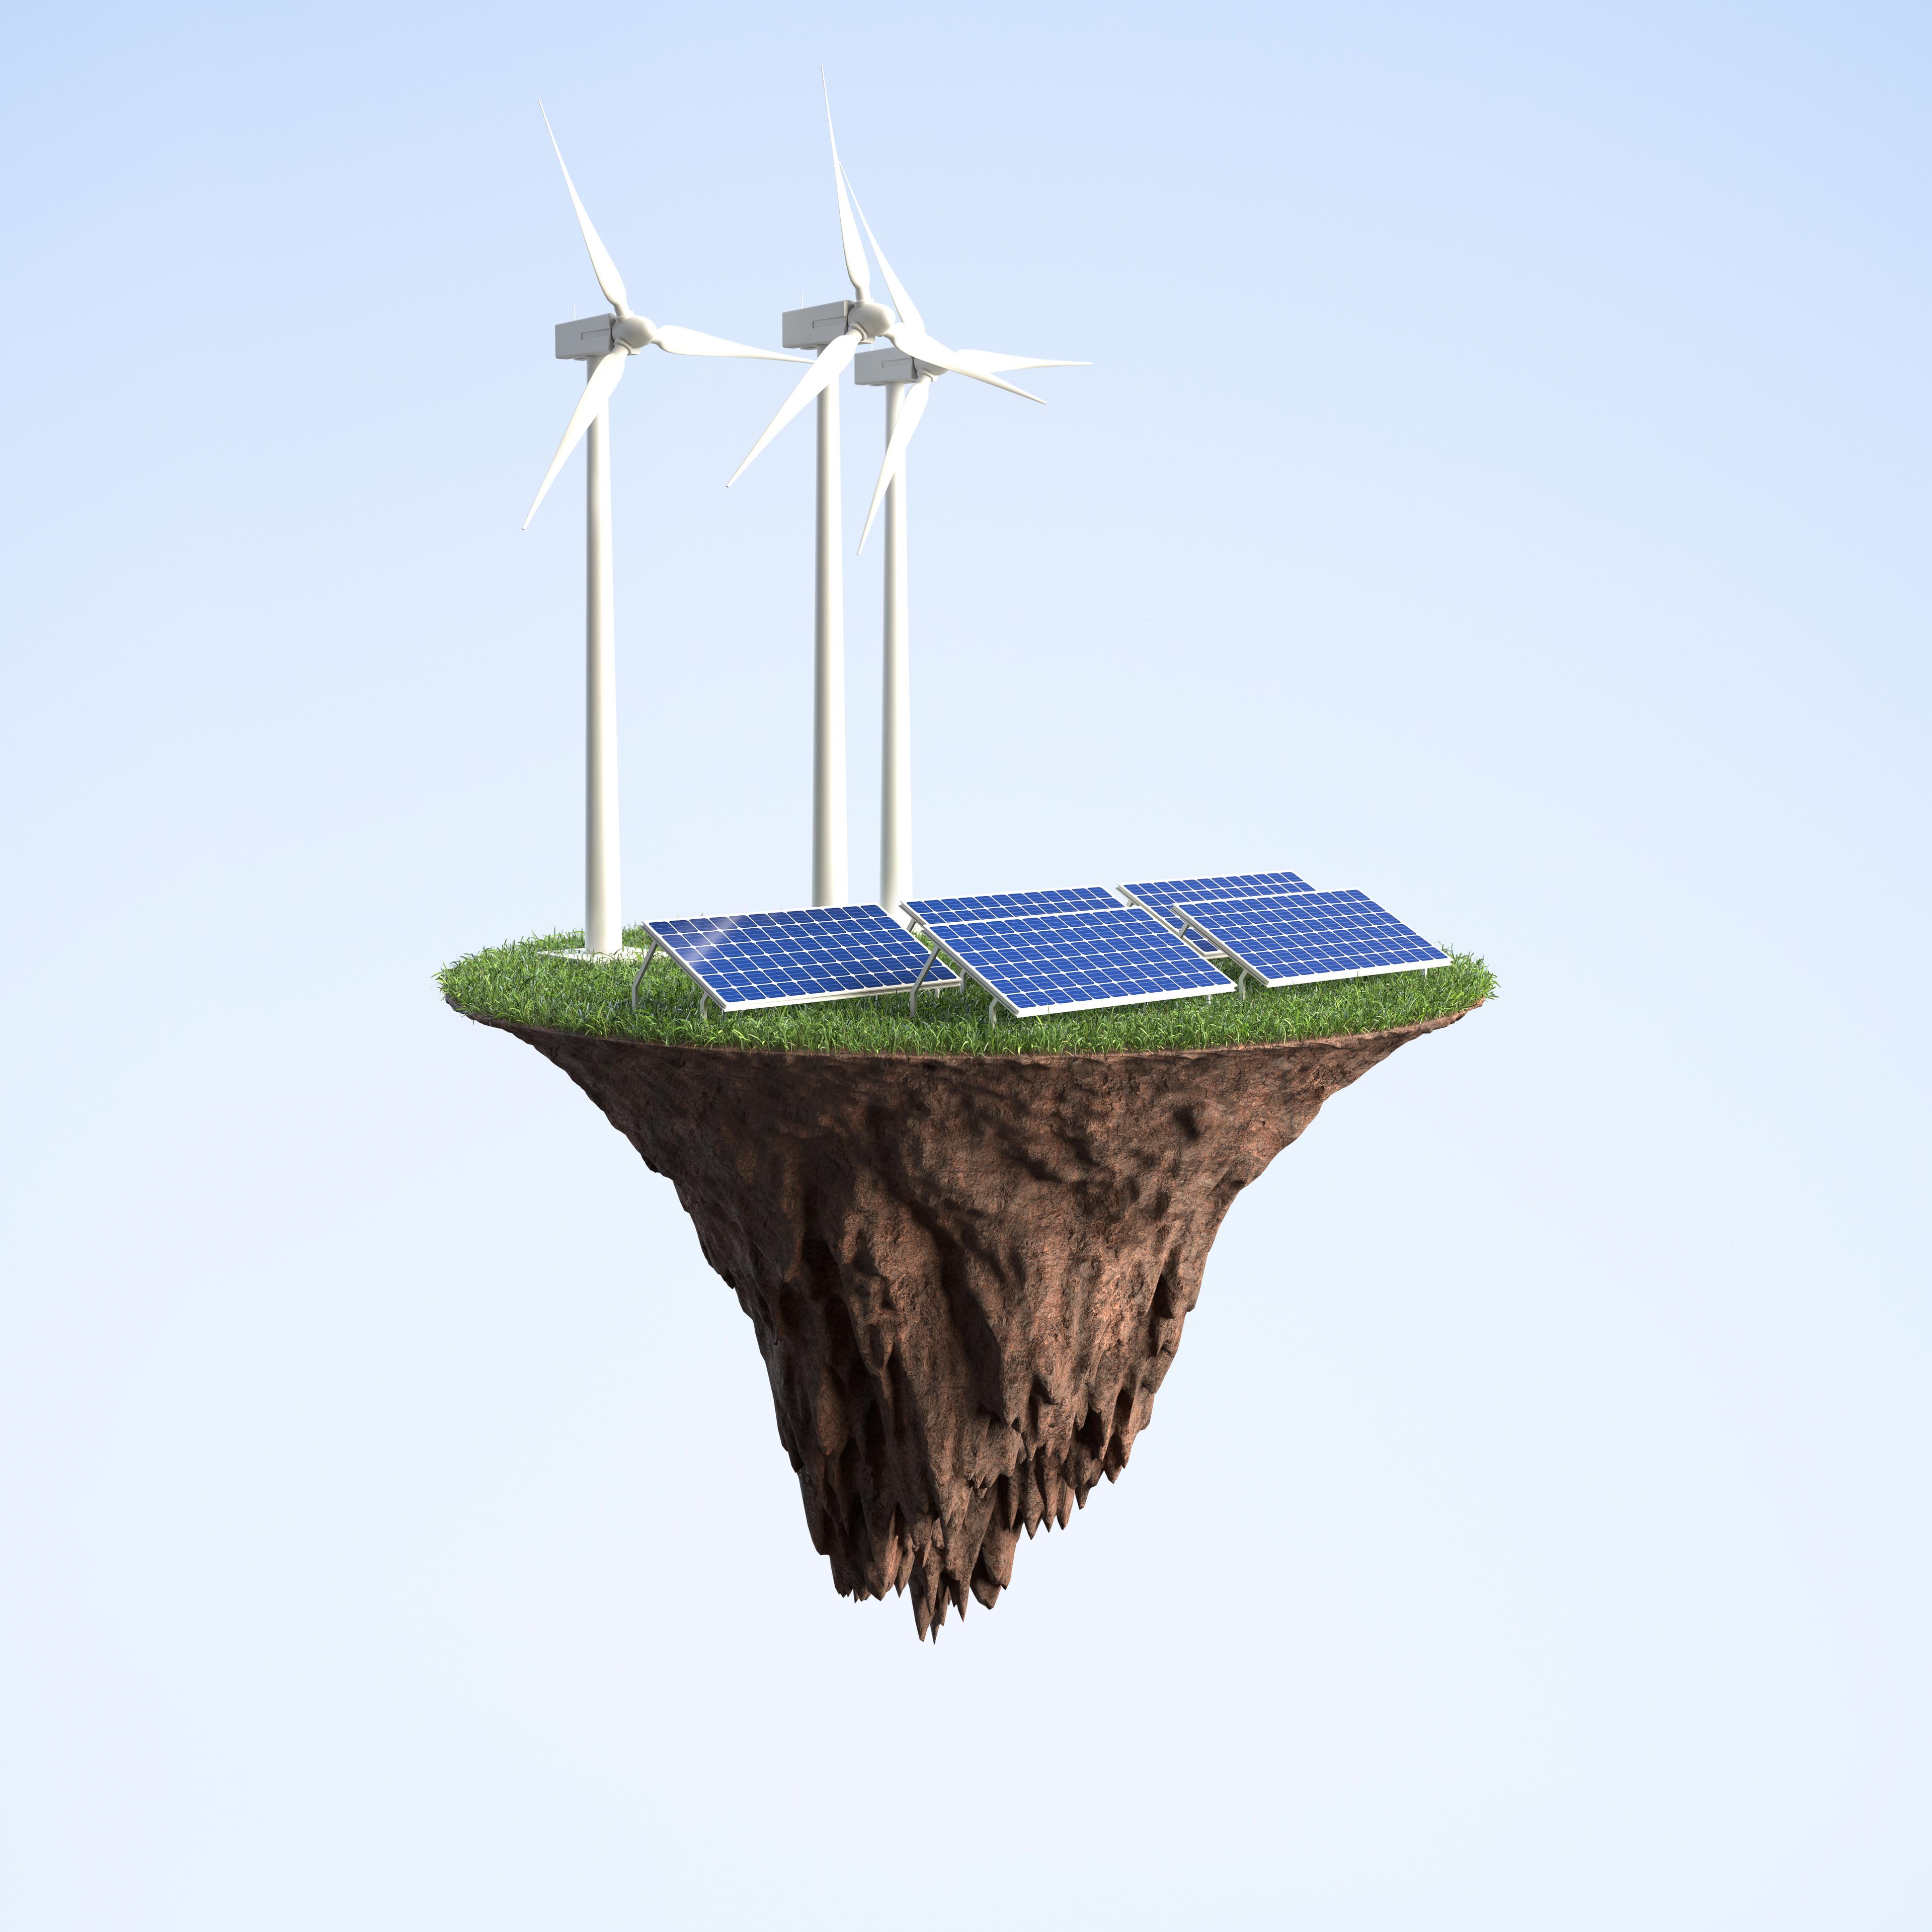 Cover Image for Incentives Provided for Renewable Energy in Turkey